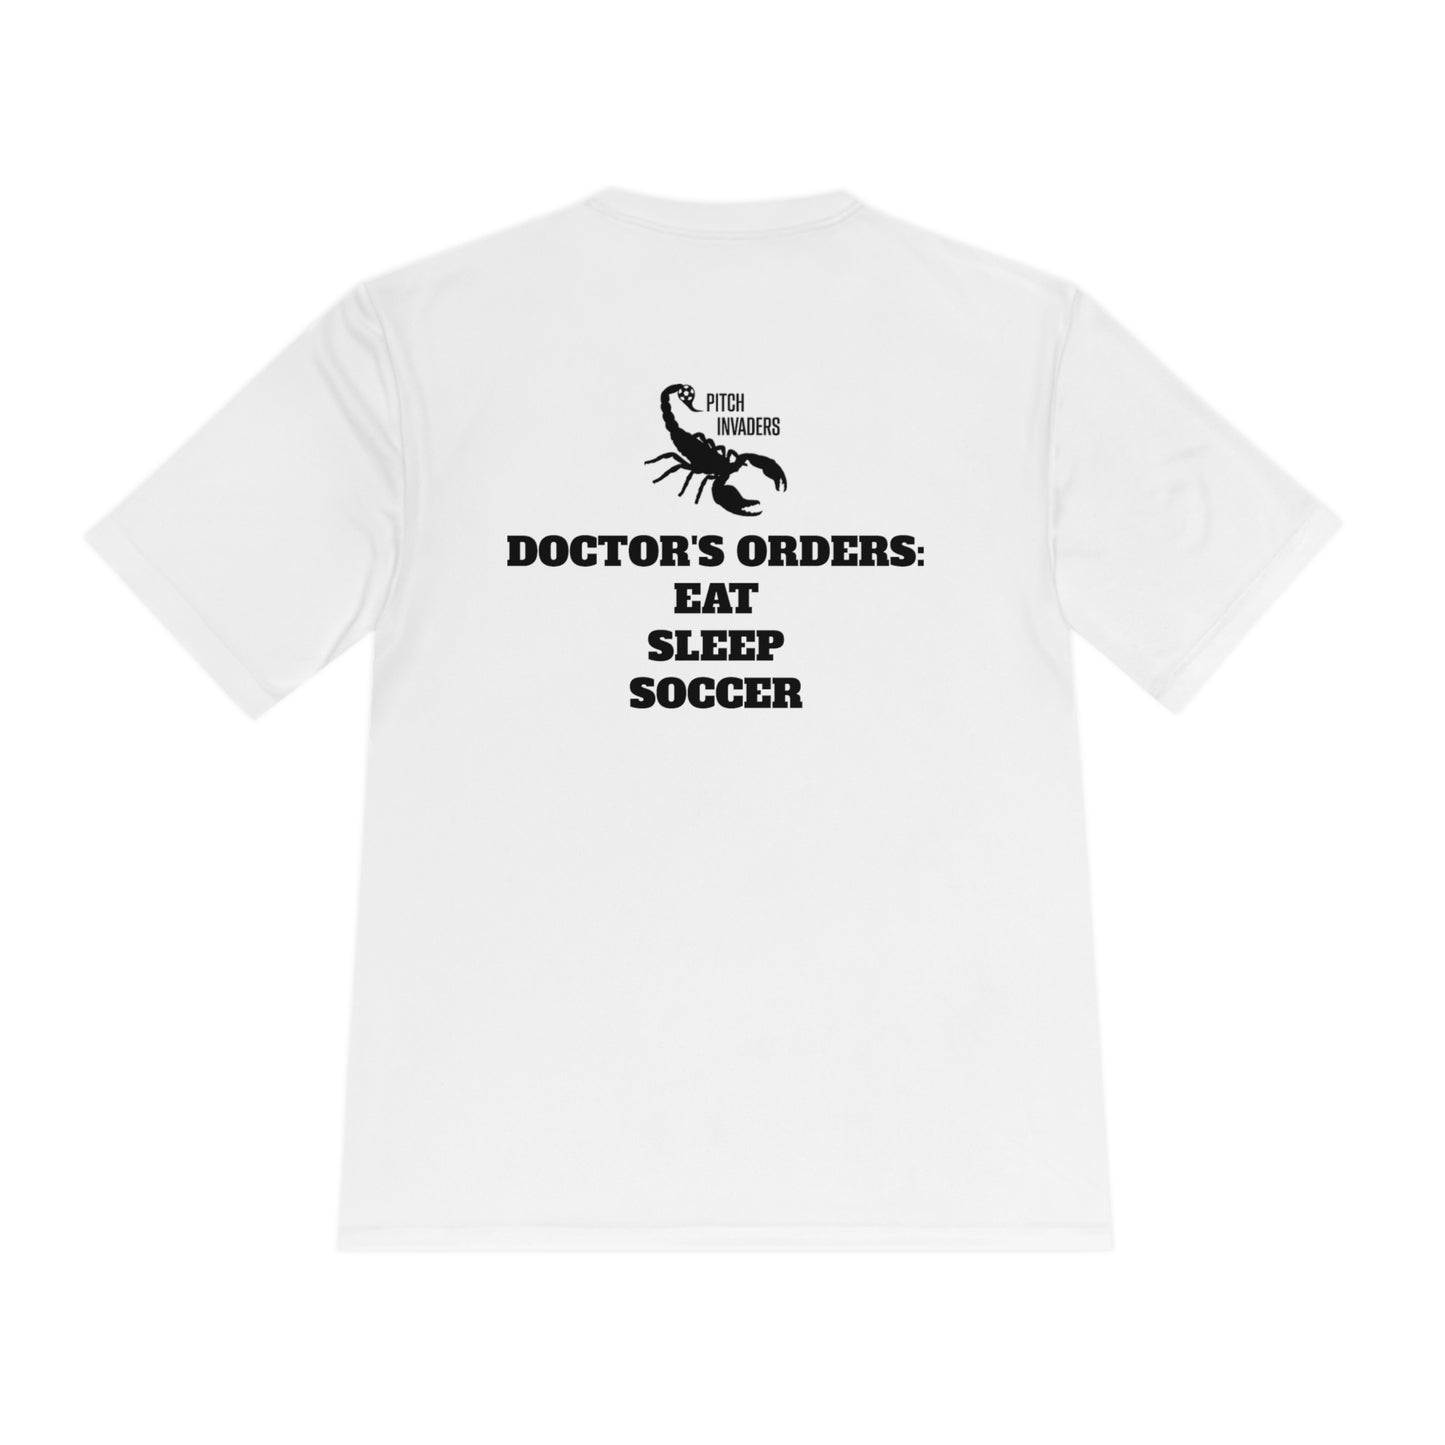 Dr. Phillips Soccer Club DOCTOR'S ORDERS Athletic T-Shirt (Unisex)